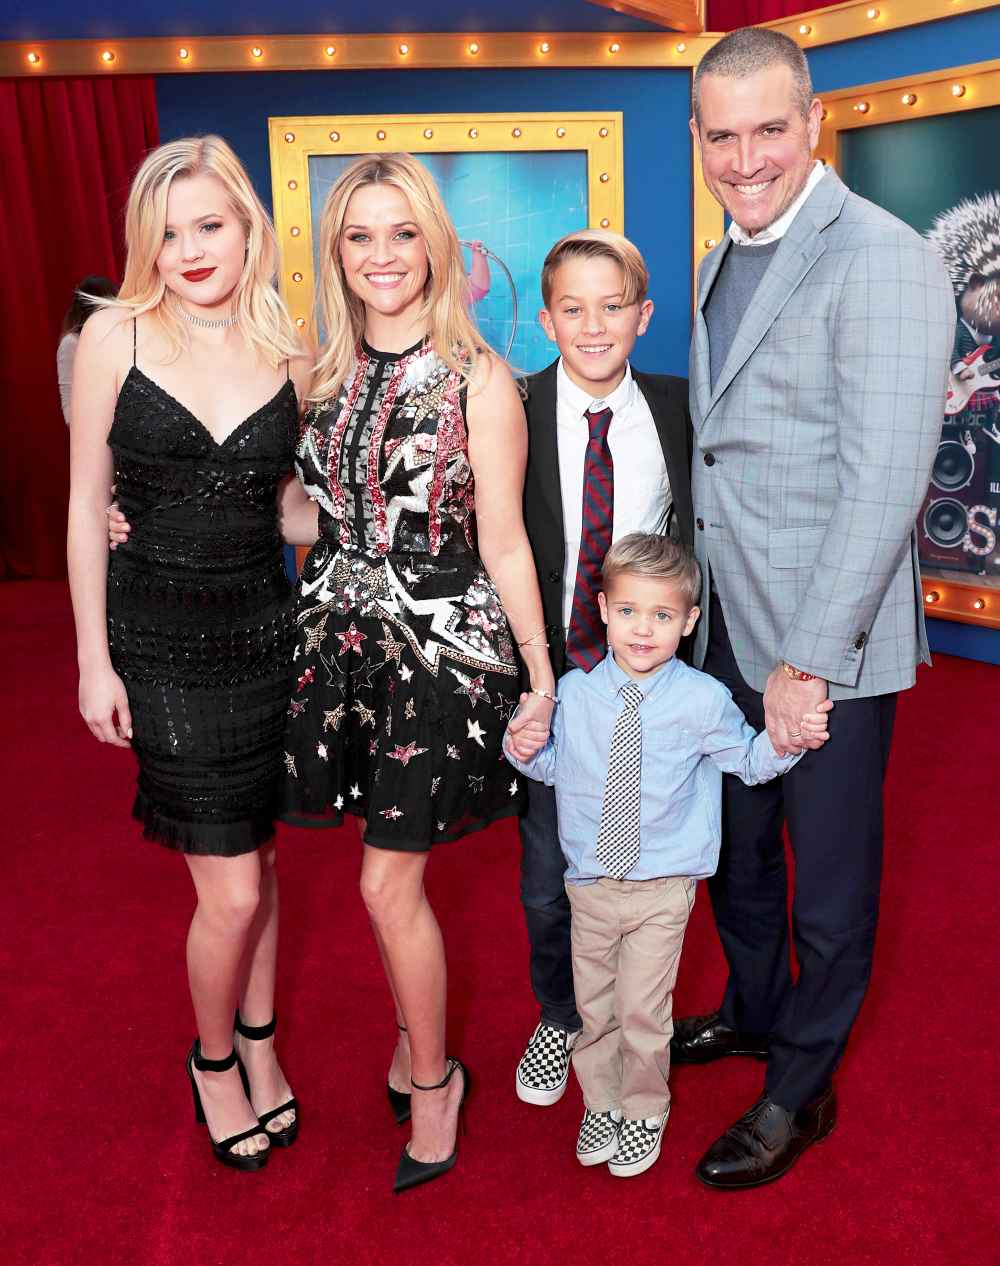 Reese Witherspoon and husband Jim Toth with children Ava, Deacon and Tennessee attend the 2016 premiere Of Universal Pictures' "Sing" in Los Angeles, California.